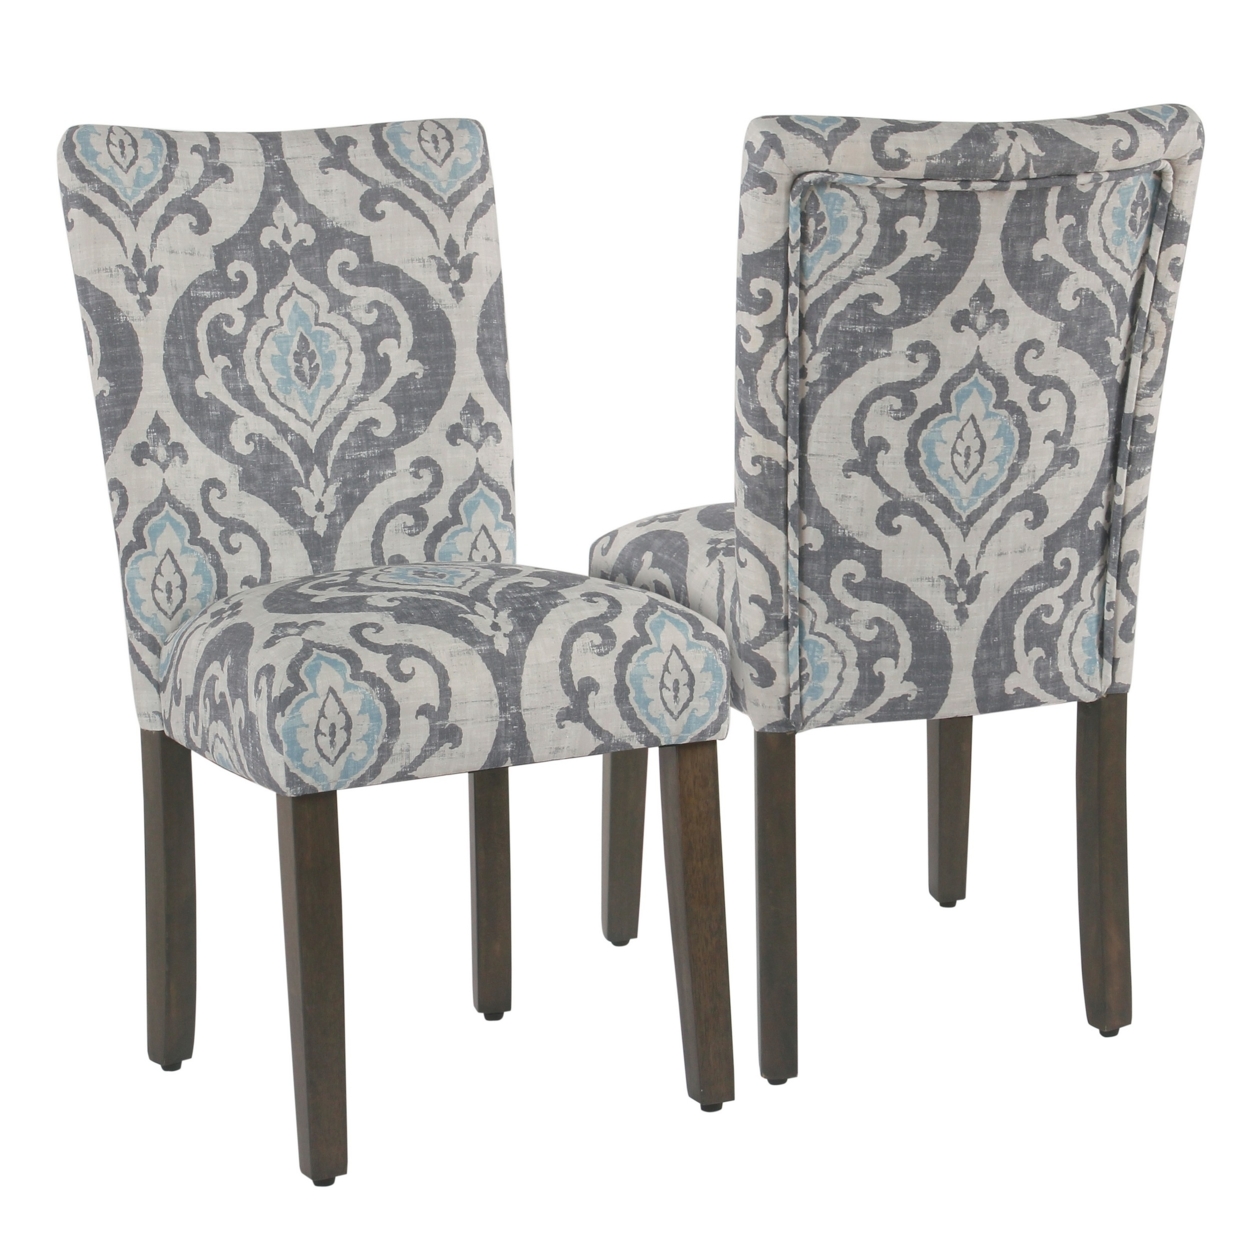 Wooden Dining Chair With Damask Print Fabric Upholstery, Gray And Blue, Set Of Two- Saltoro Sherpi